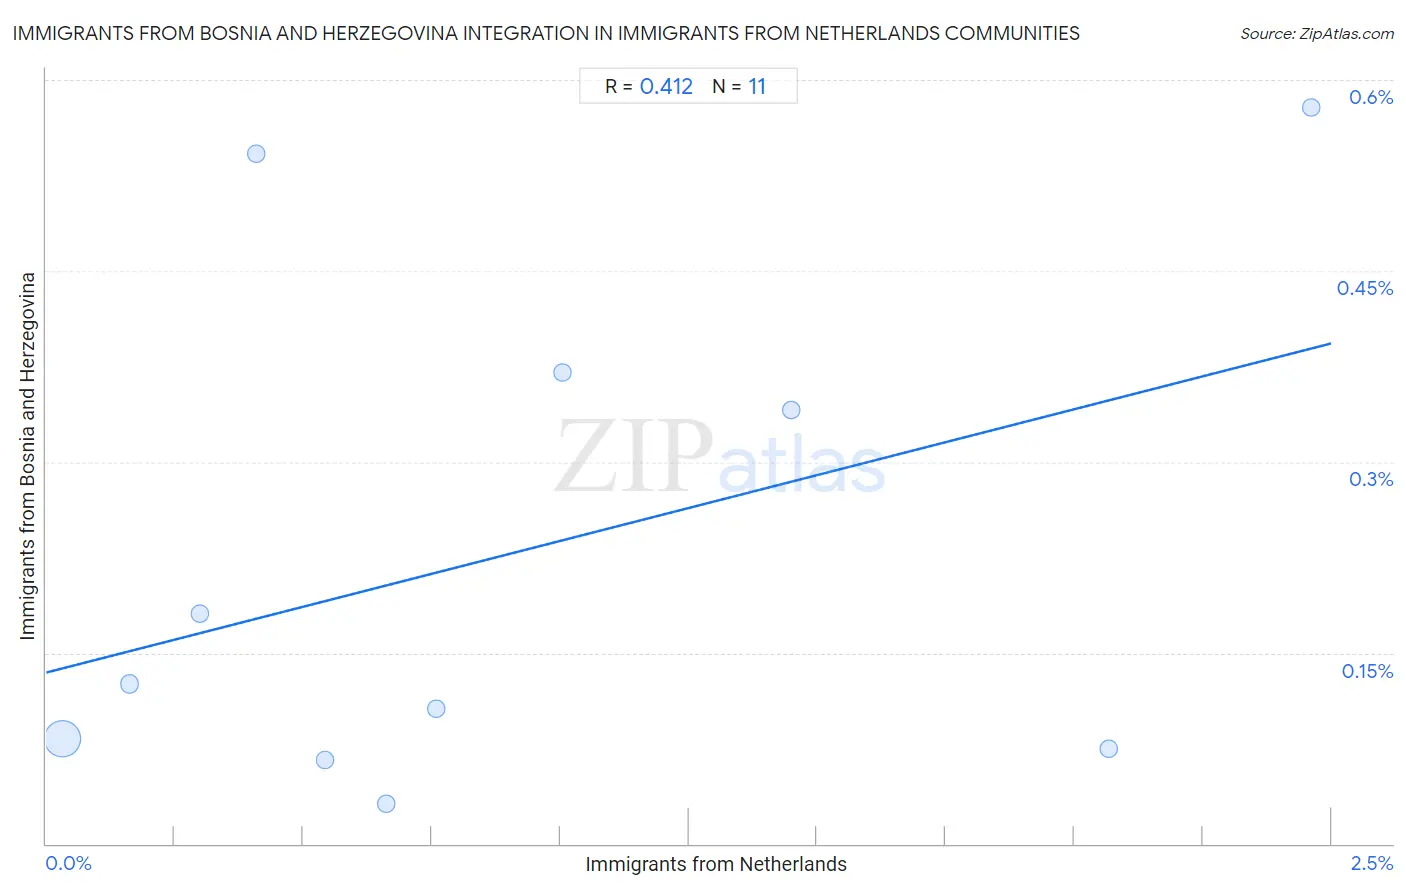 Immigrants from Netherlands Integration in Immigrants from Bosnia and Herzegovina Communities